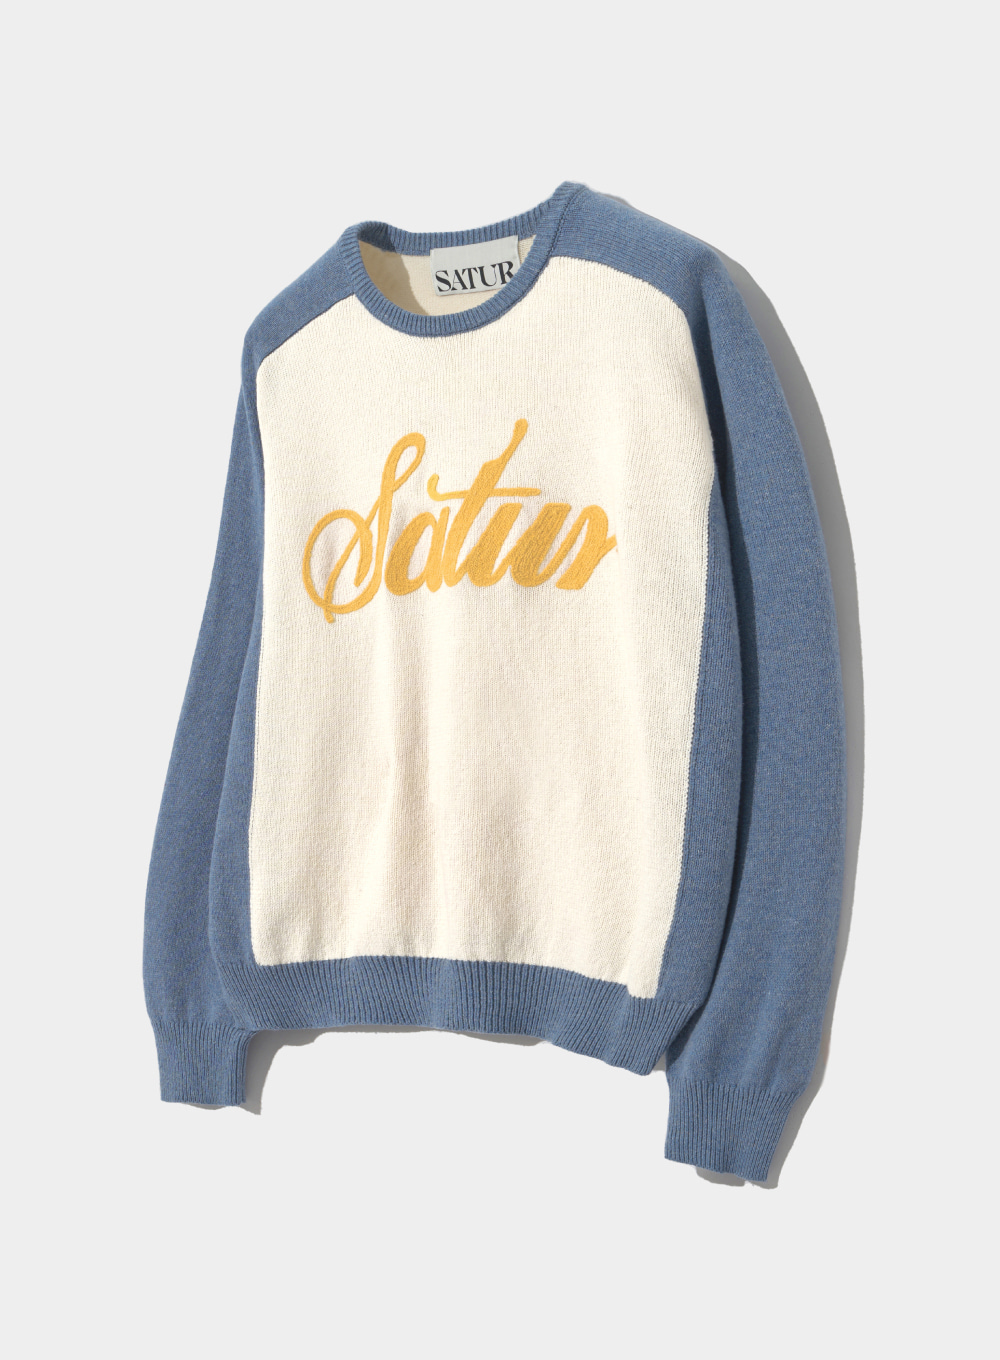 Retro Chain Embroidery Soft Knit - Ivory Blue